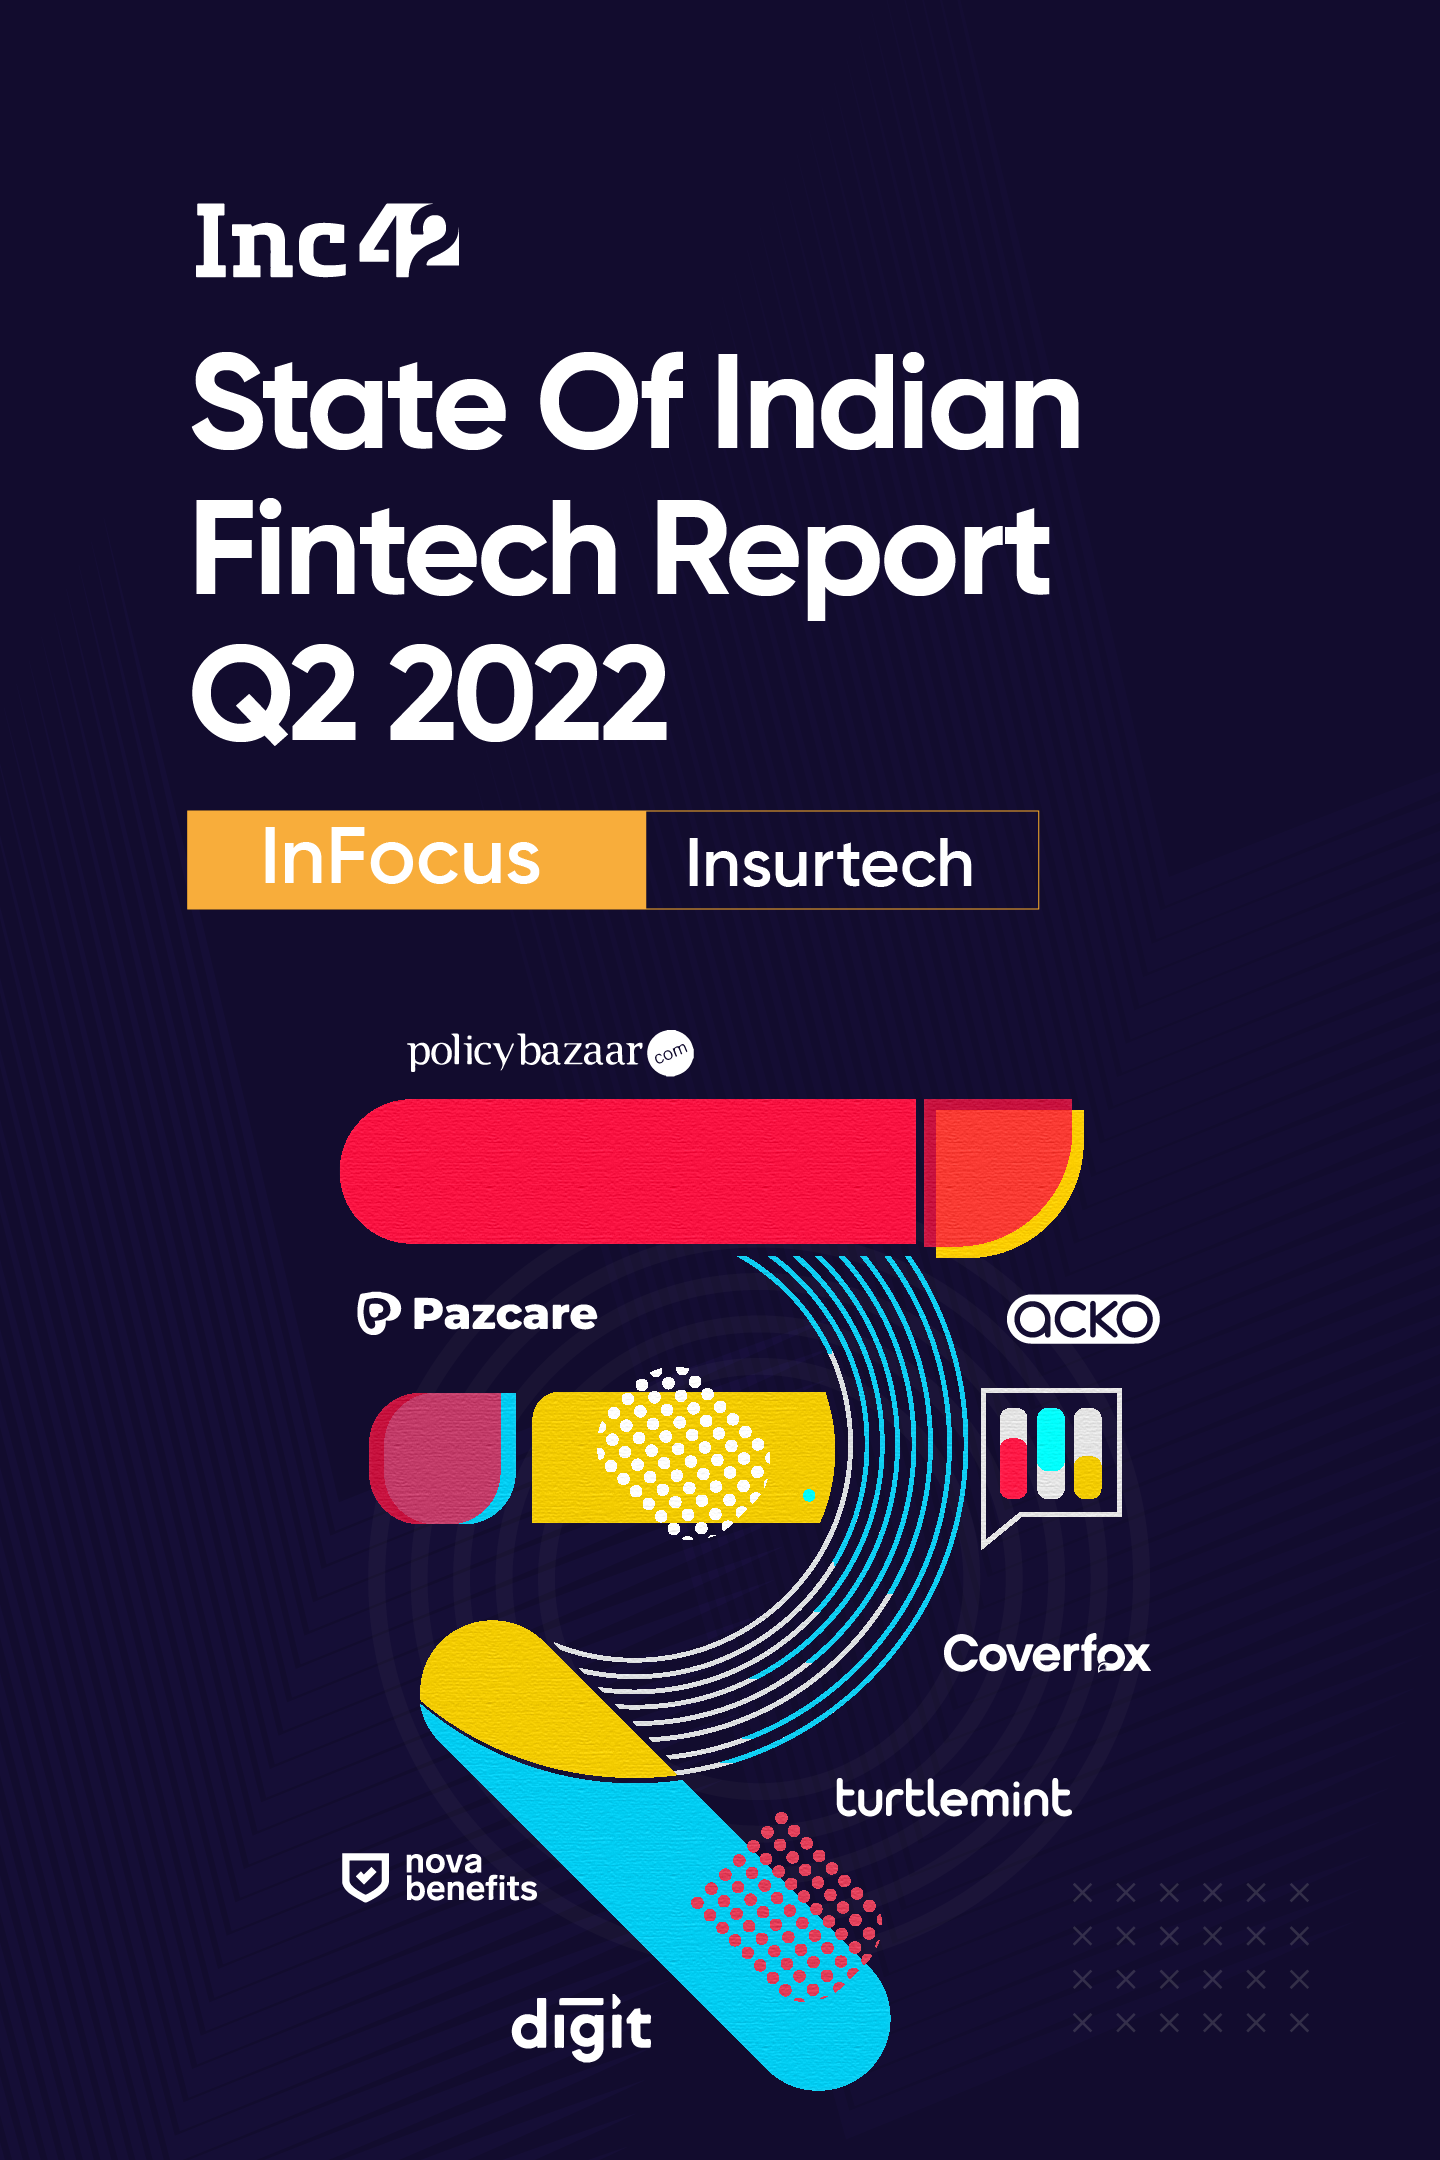 State Of Indian Fintech Report, Q2 2022